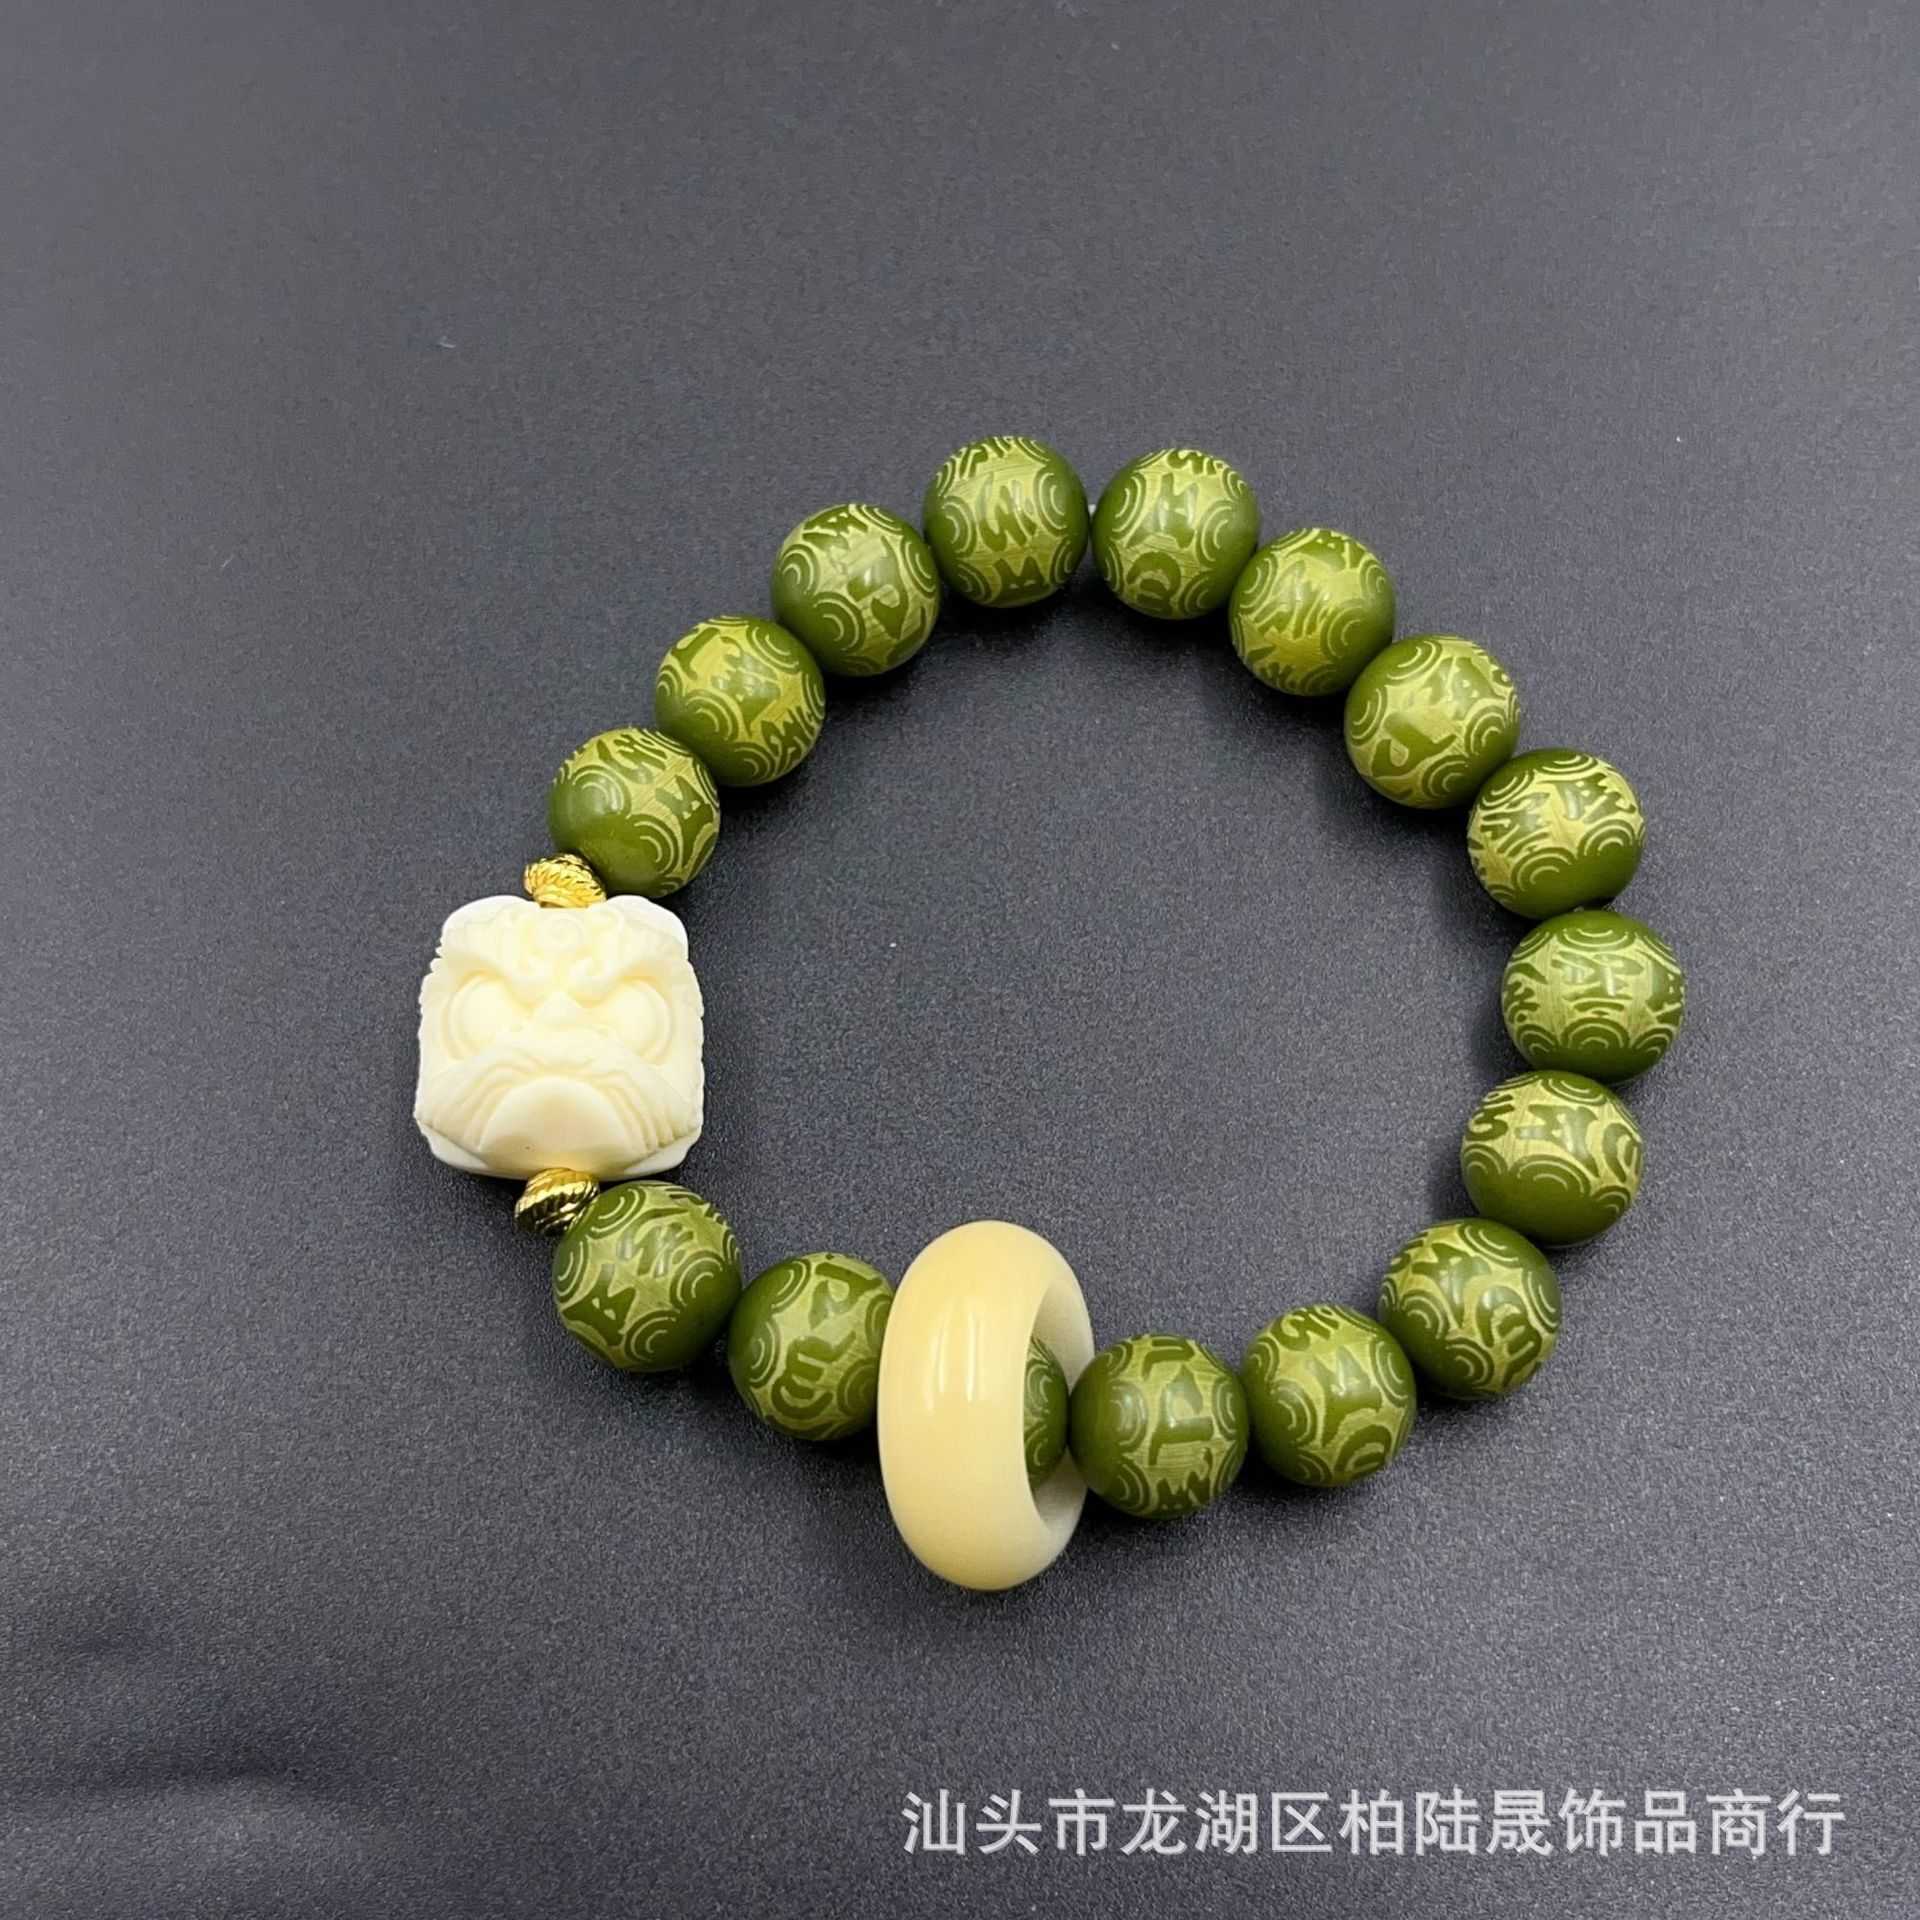 Charm Bracelets Six Character Proverbs Bracelet Ivory Fruit Lion Awakening Style Green Bodhisattva Handle National Style Playing with Running Rings Running S7O1